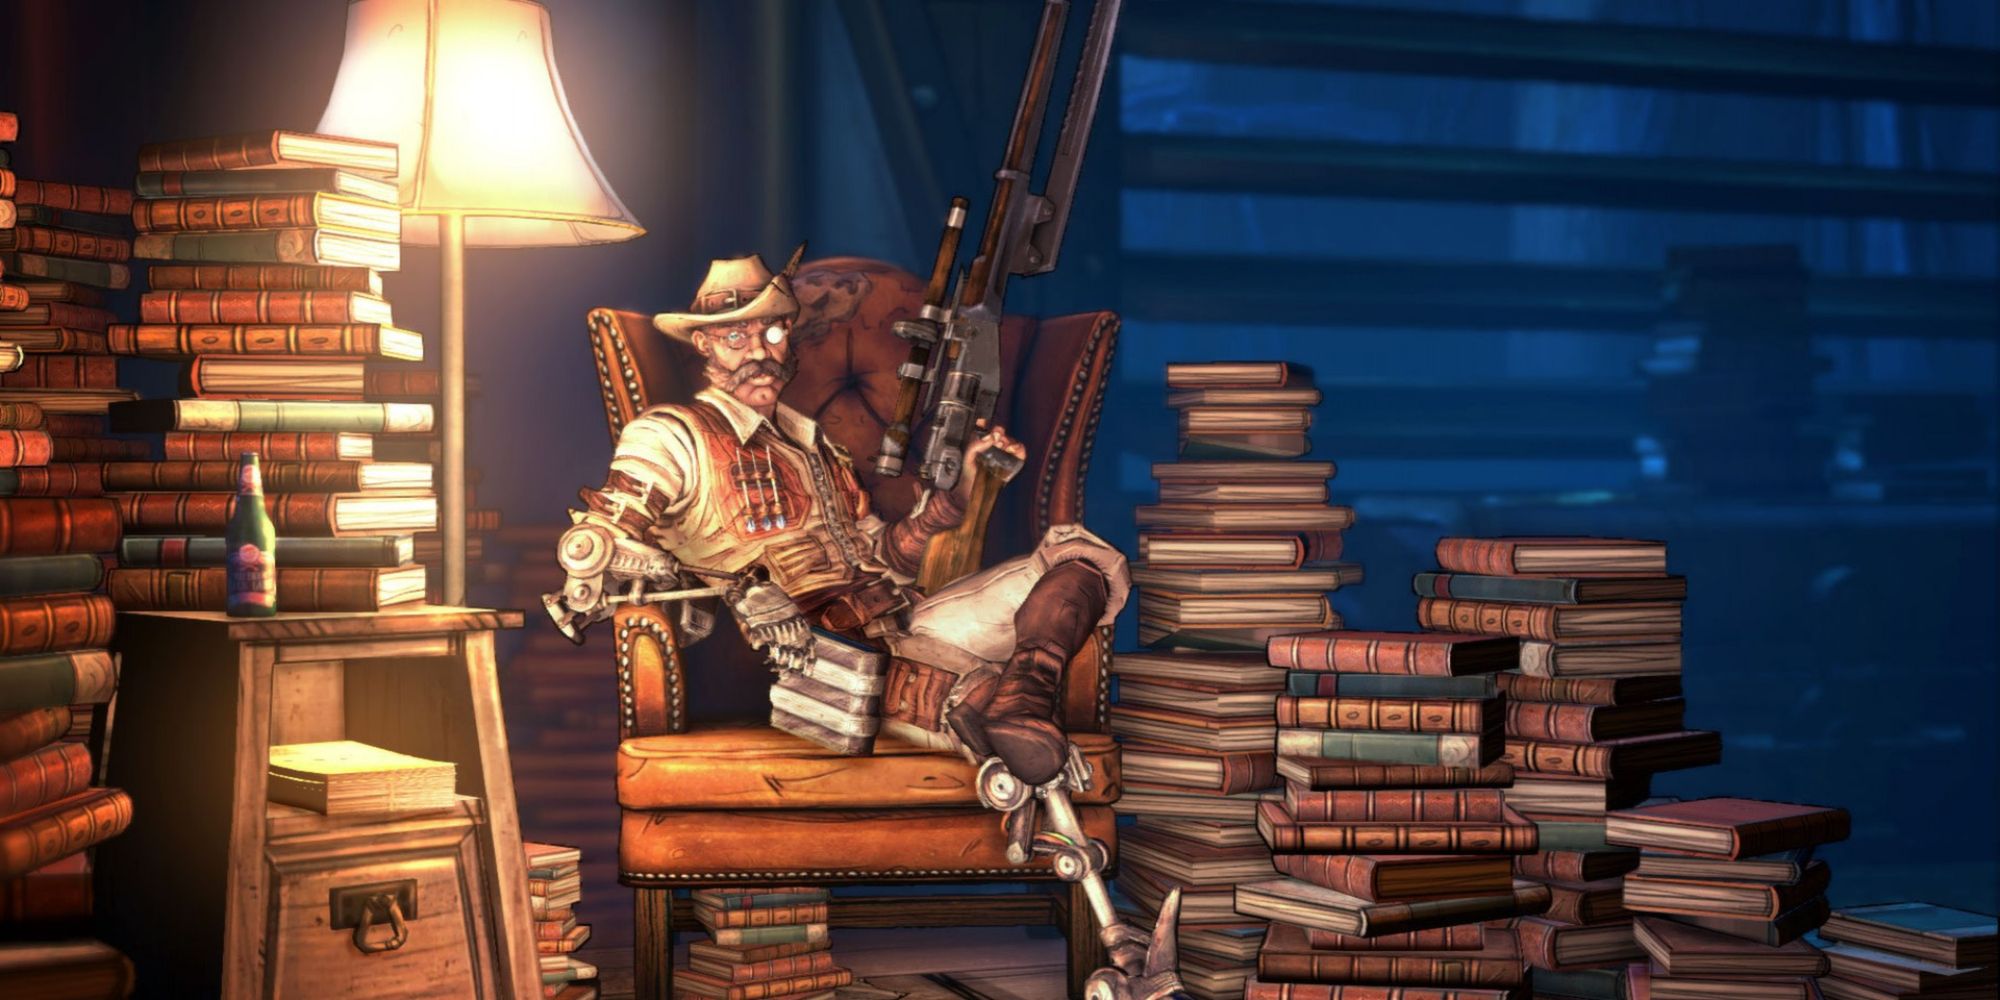 Borderlands 2 Sir Hammerlock Sitting In Chair Holding A Gun And Surrounded By Books